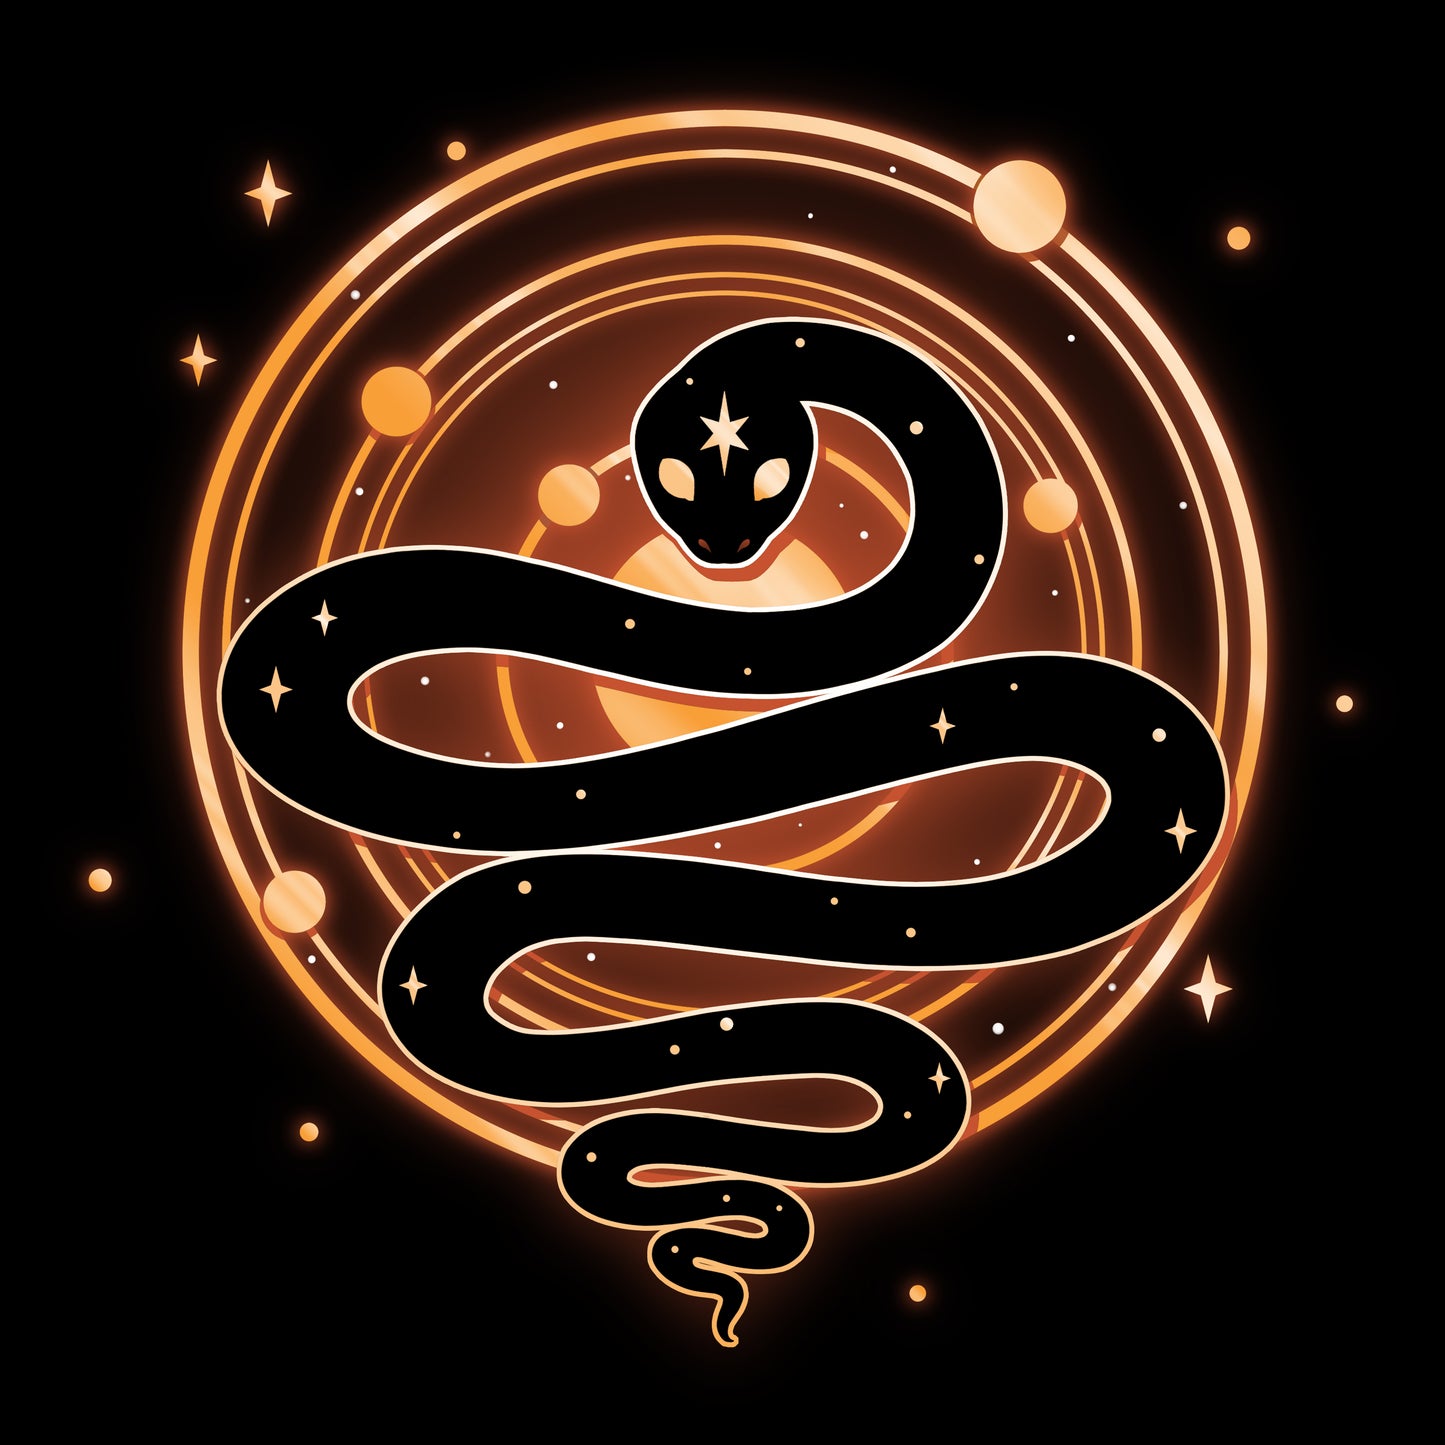 An image of the Serpent of Cosmos on a TeeTurtle T-shirt.